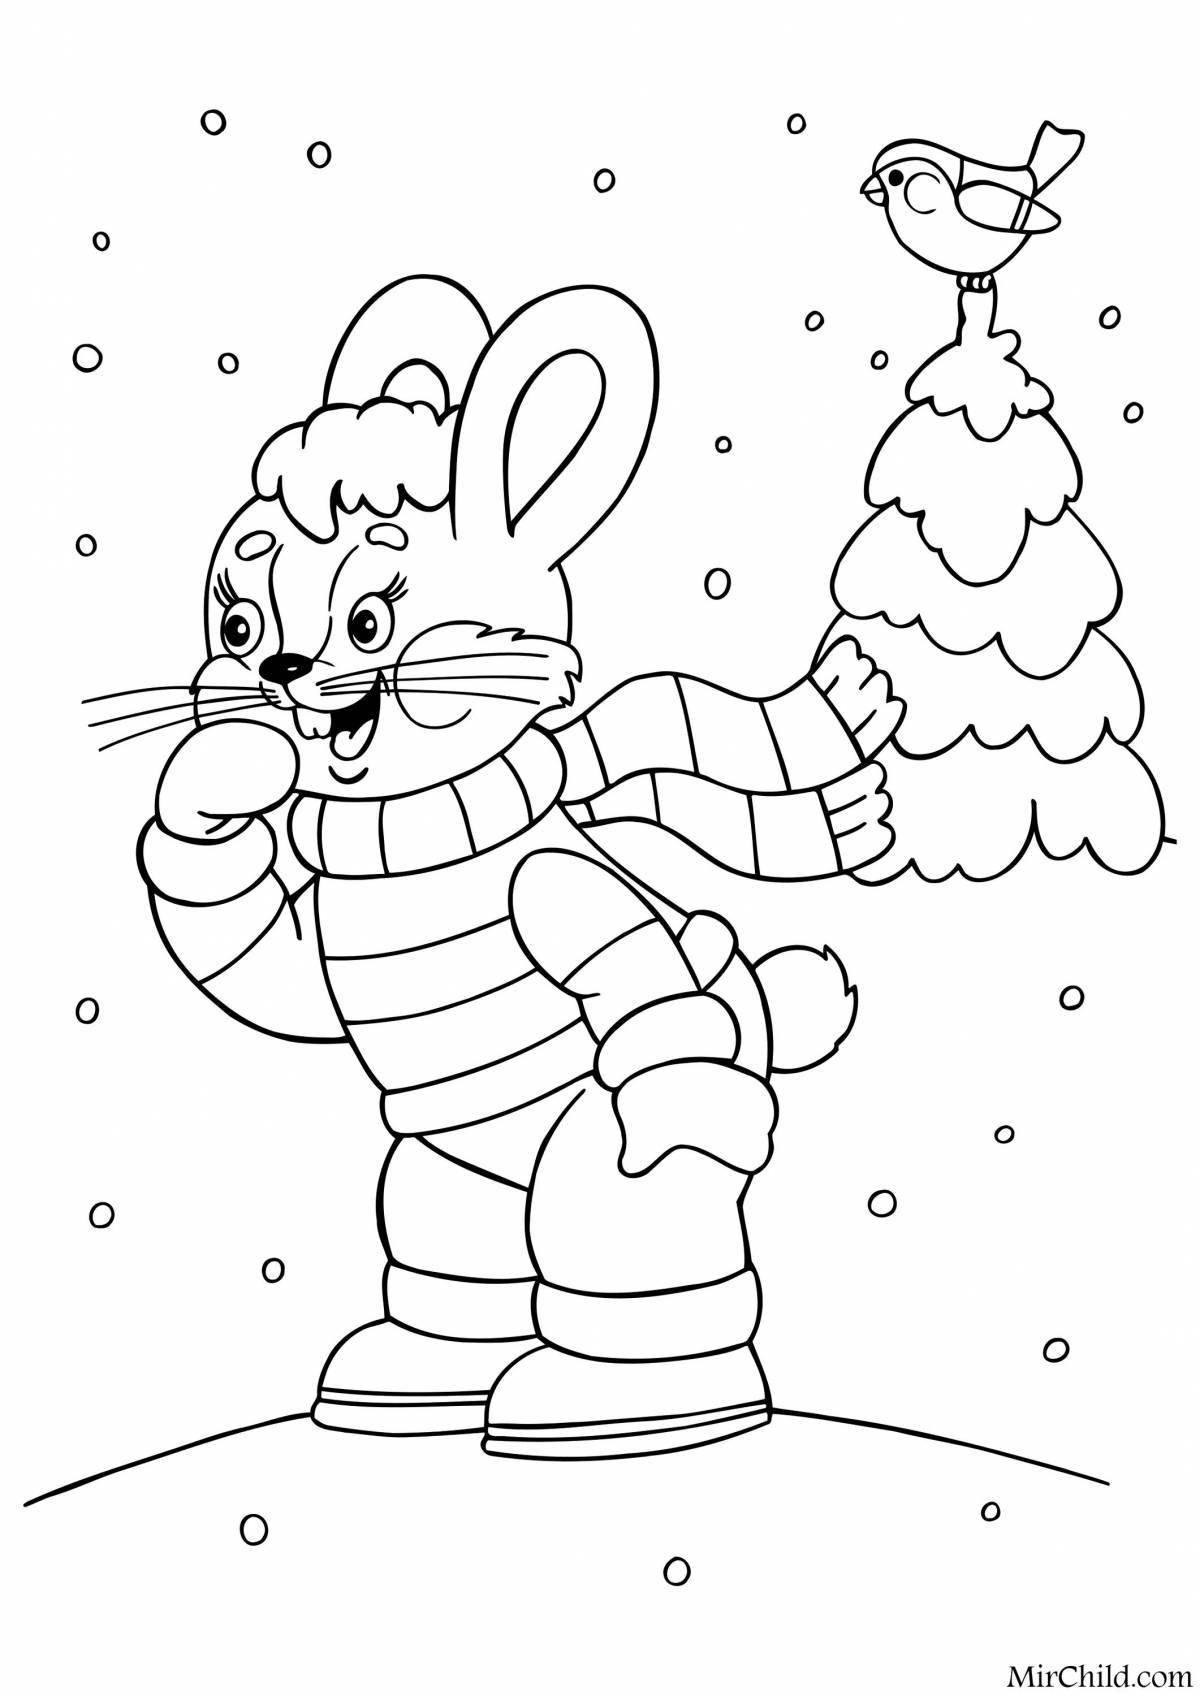 Christmas coloring book with bright hare